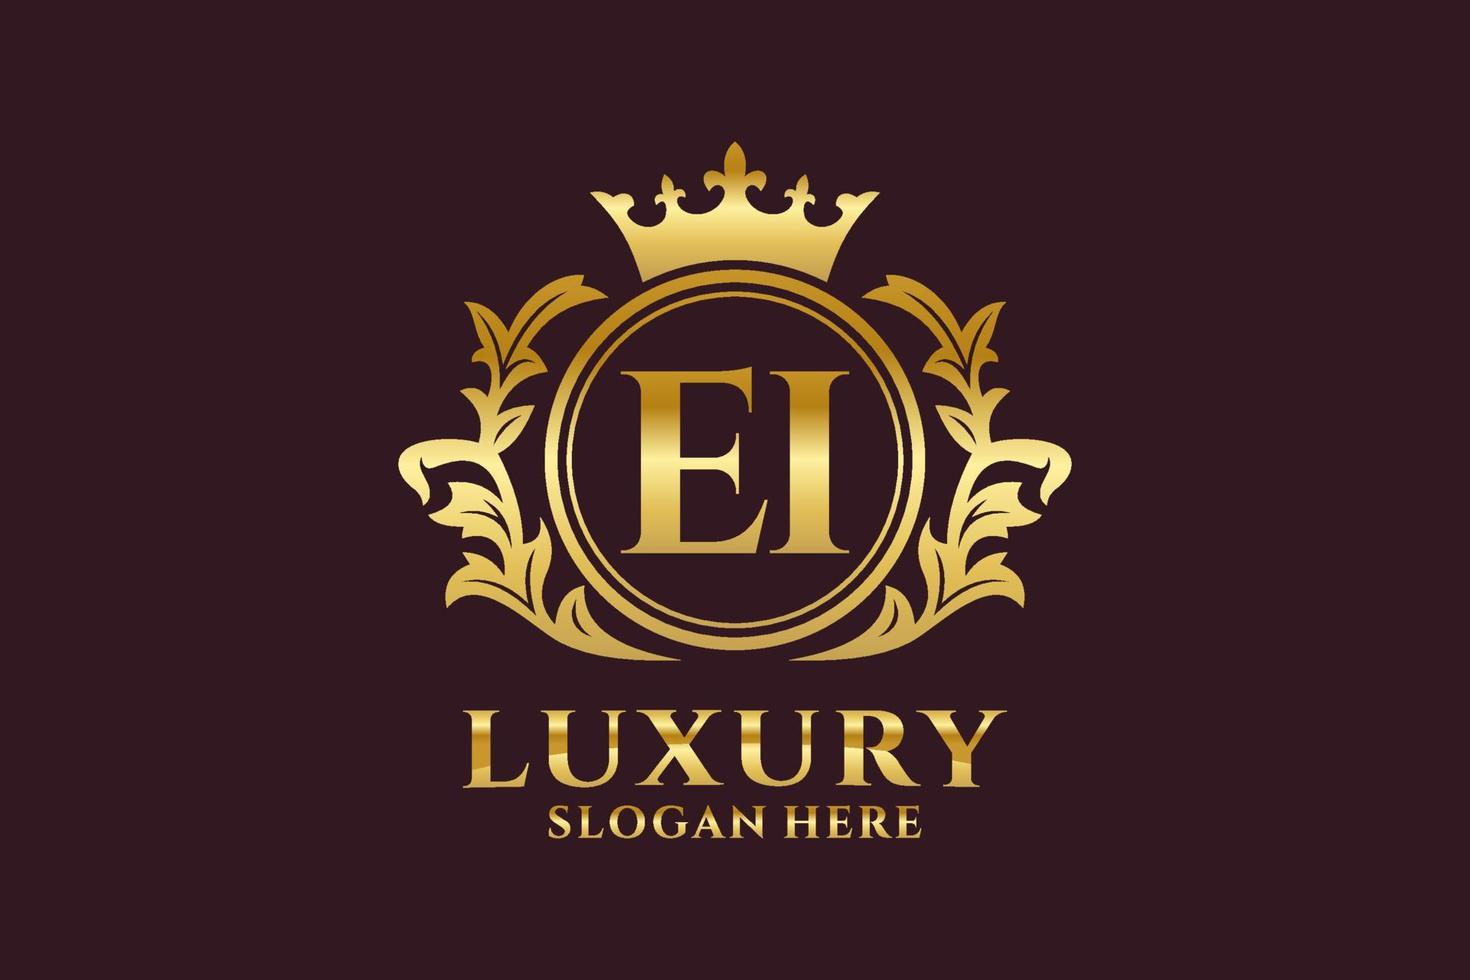 Initial EI Letter Royal Luxury Logo template in vector art for luxurious branding projects and other vector illustration.